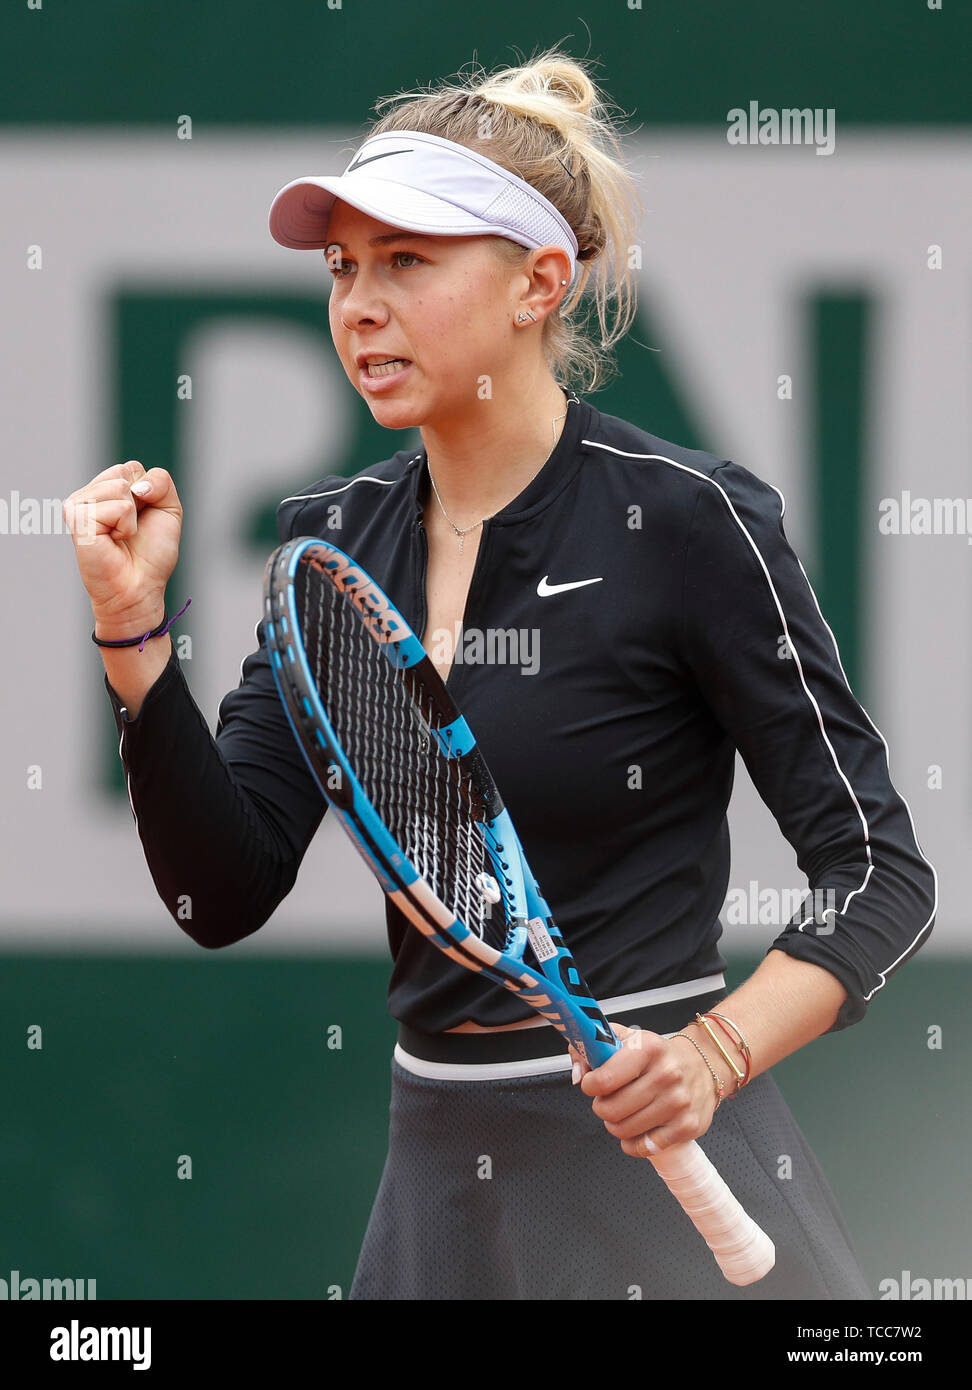 Paris, Paris. 7th June, 2019. Amanda Anisimova of the United States reacts  during the women's singles semifinal match with Ashleigh Barty of Australia  at French Open tennis tournament 2019 at Roland Garros,